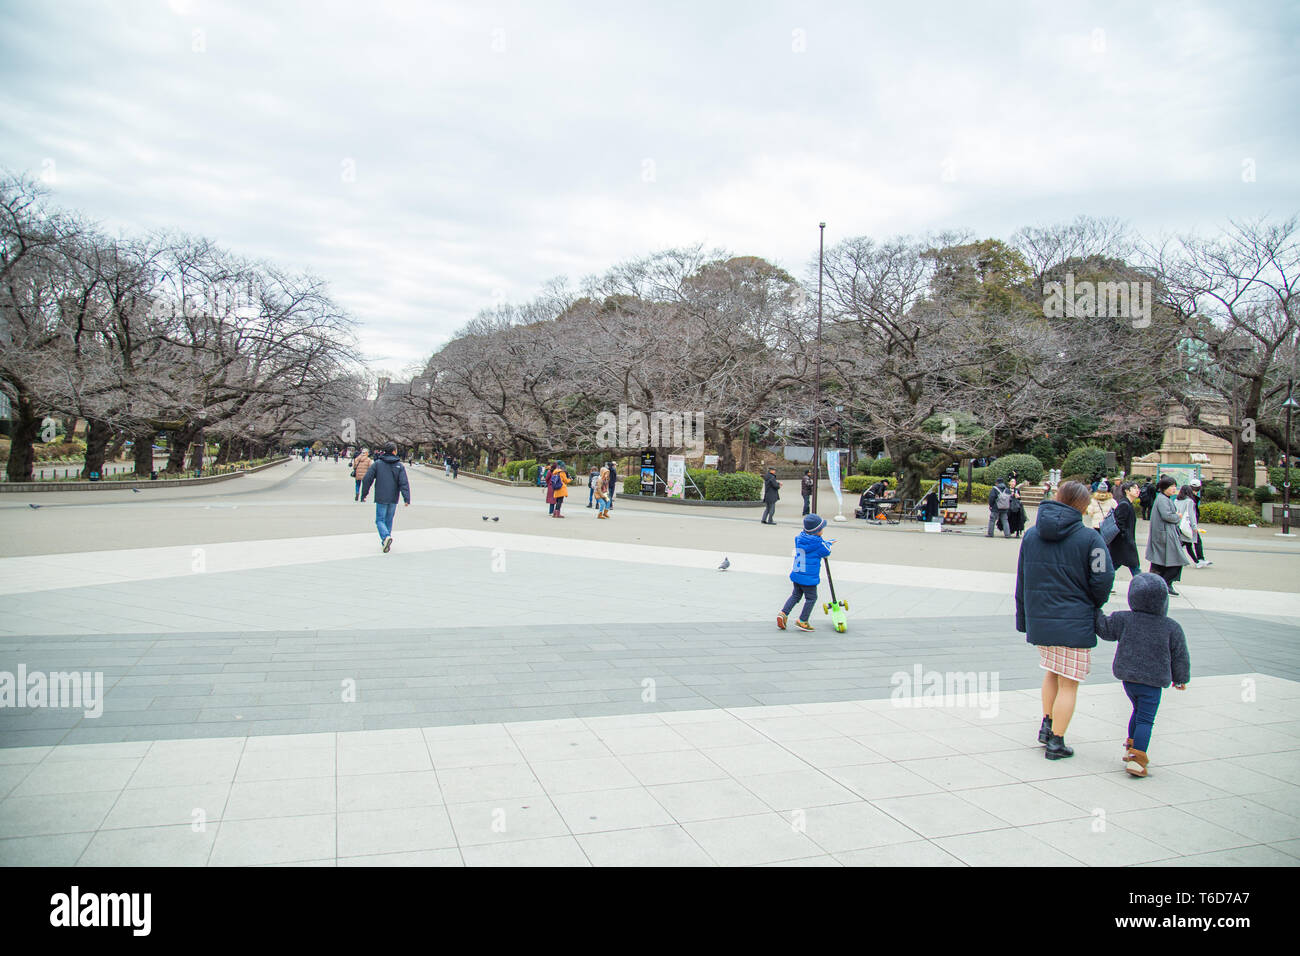 TOKYO, JAPAN - FEBRUARY 8, 2019: Unidentified people walking around Ueno Onshi Park. Ueno Park is a public park in Ueno area, northern Tokyo. The park Stock Photo